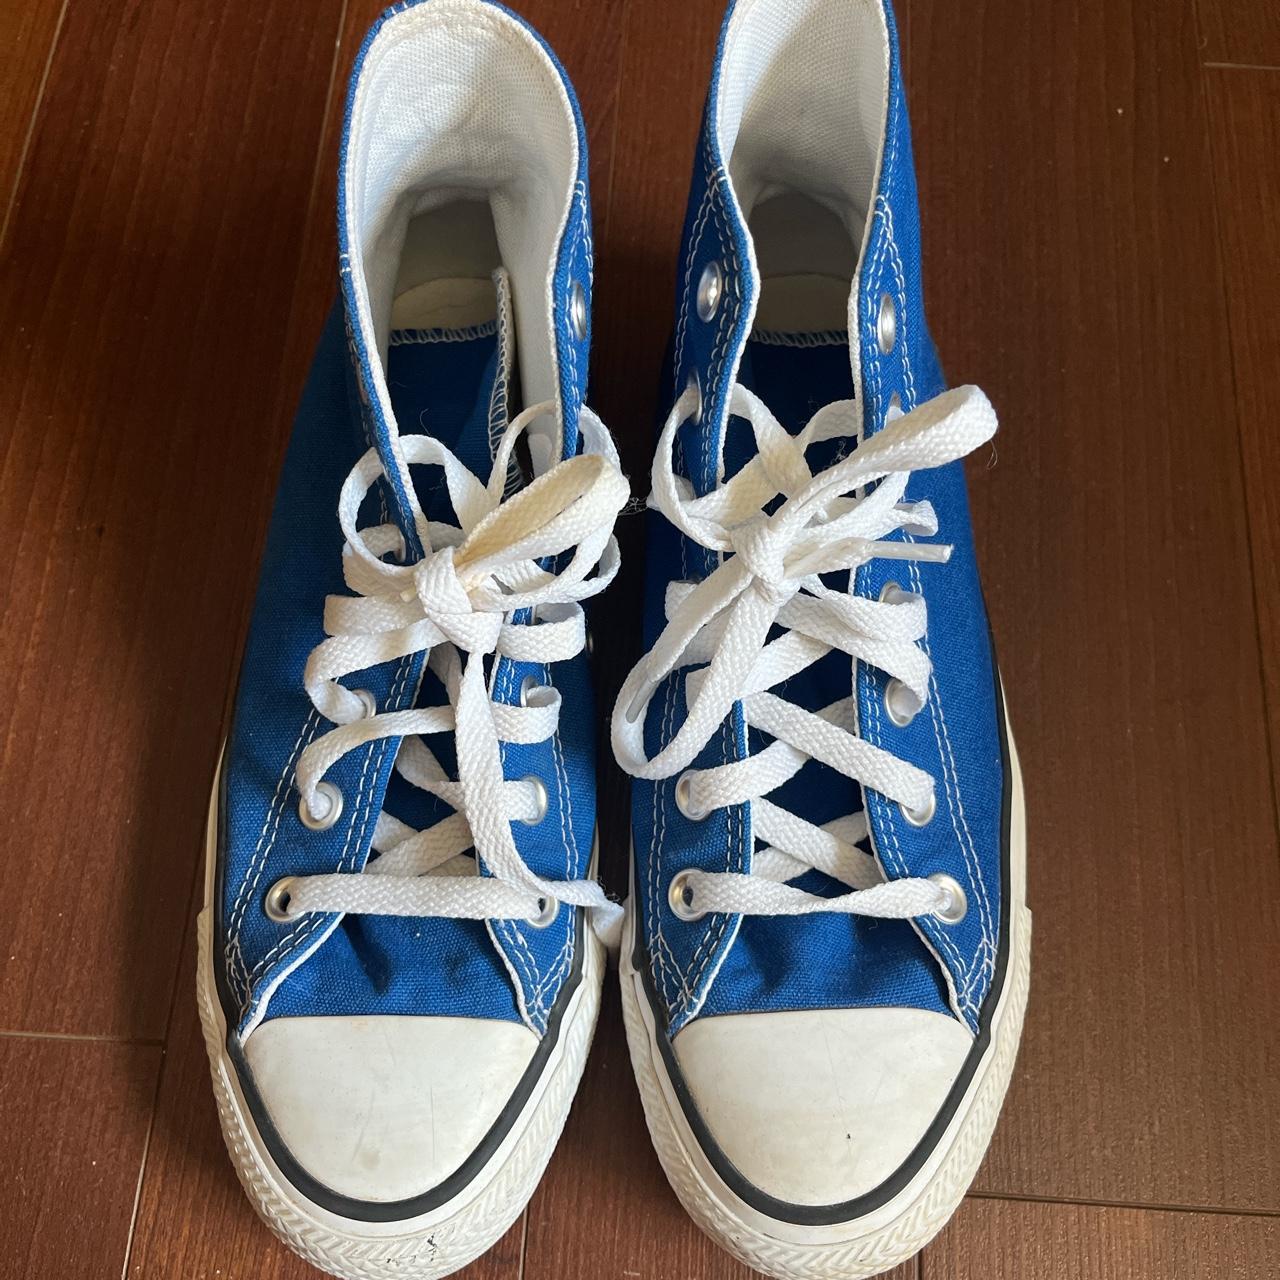 Converse Men's Blue and White Trainers | Depop